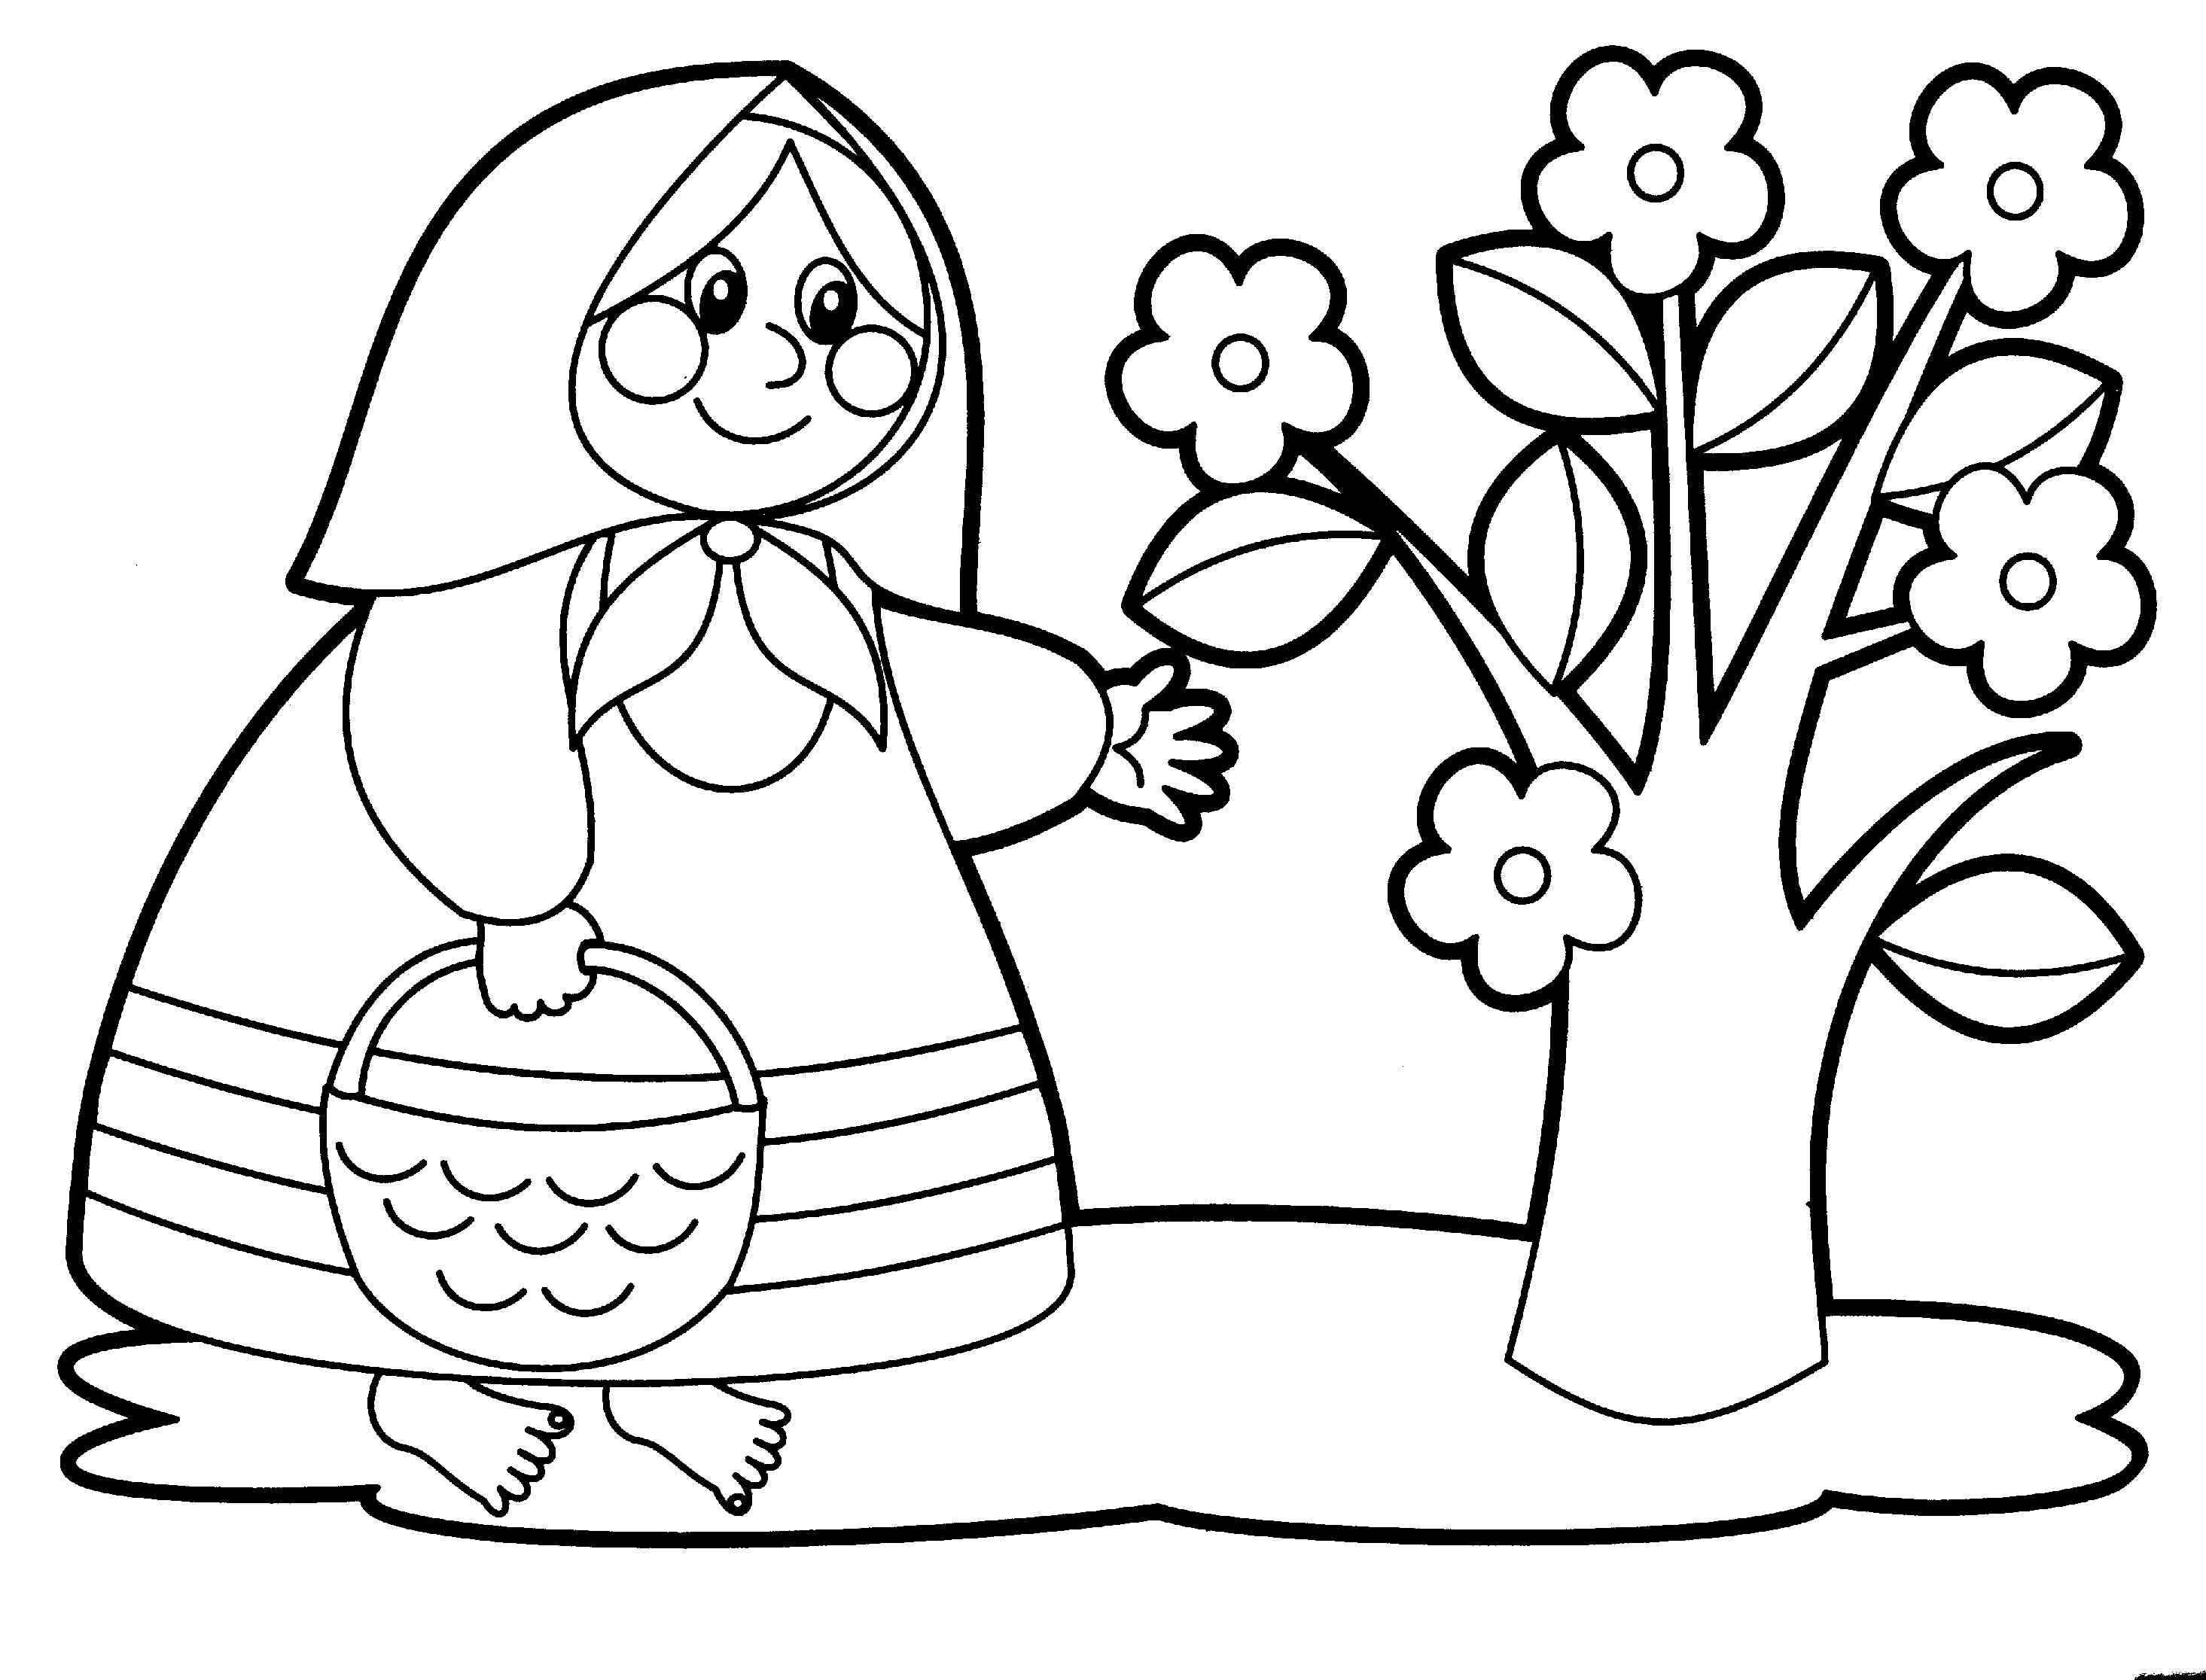 Little people coloring pages for babies 26 / Little people / Kids ...